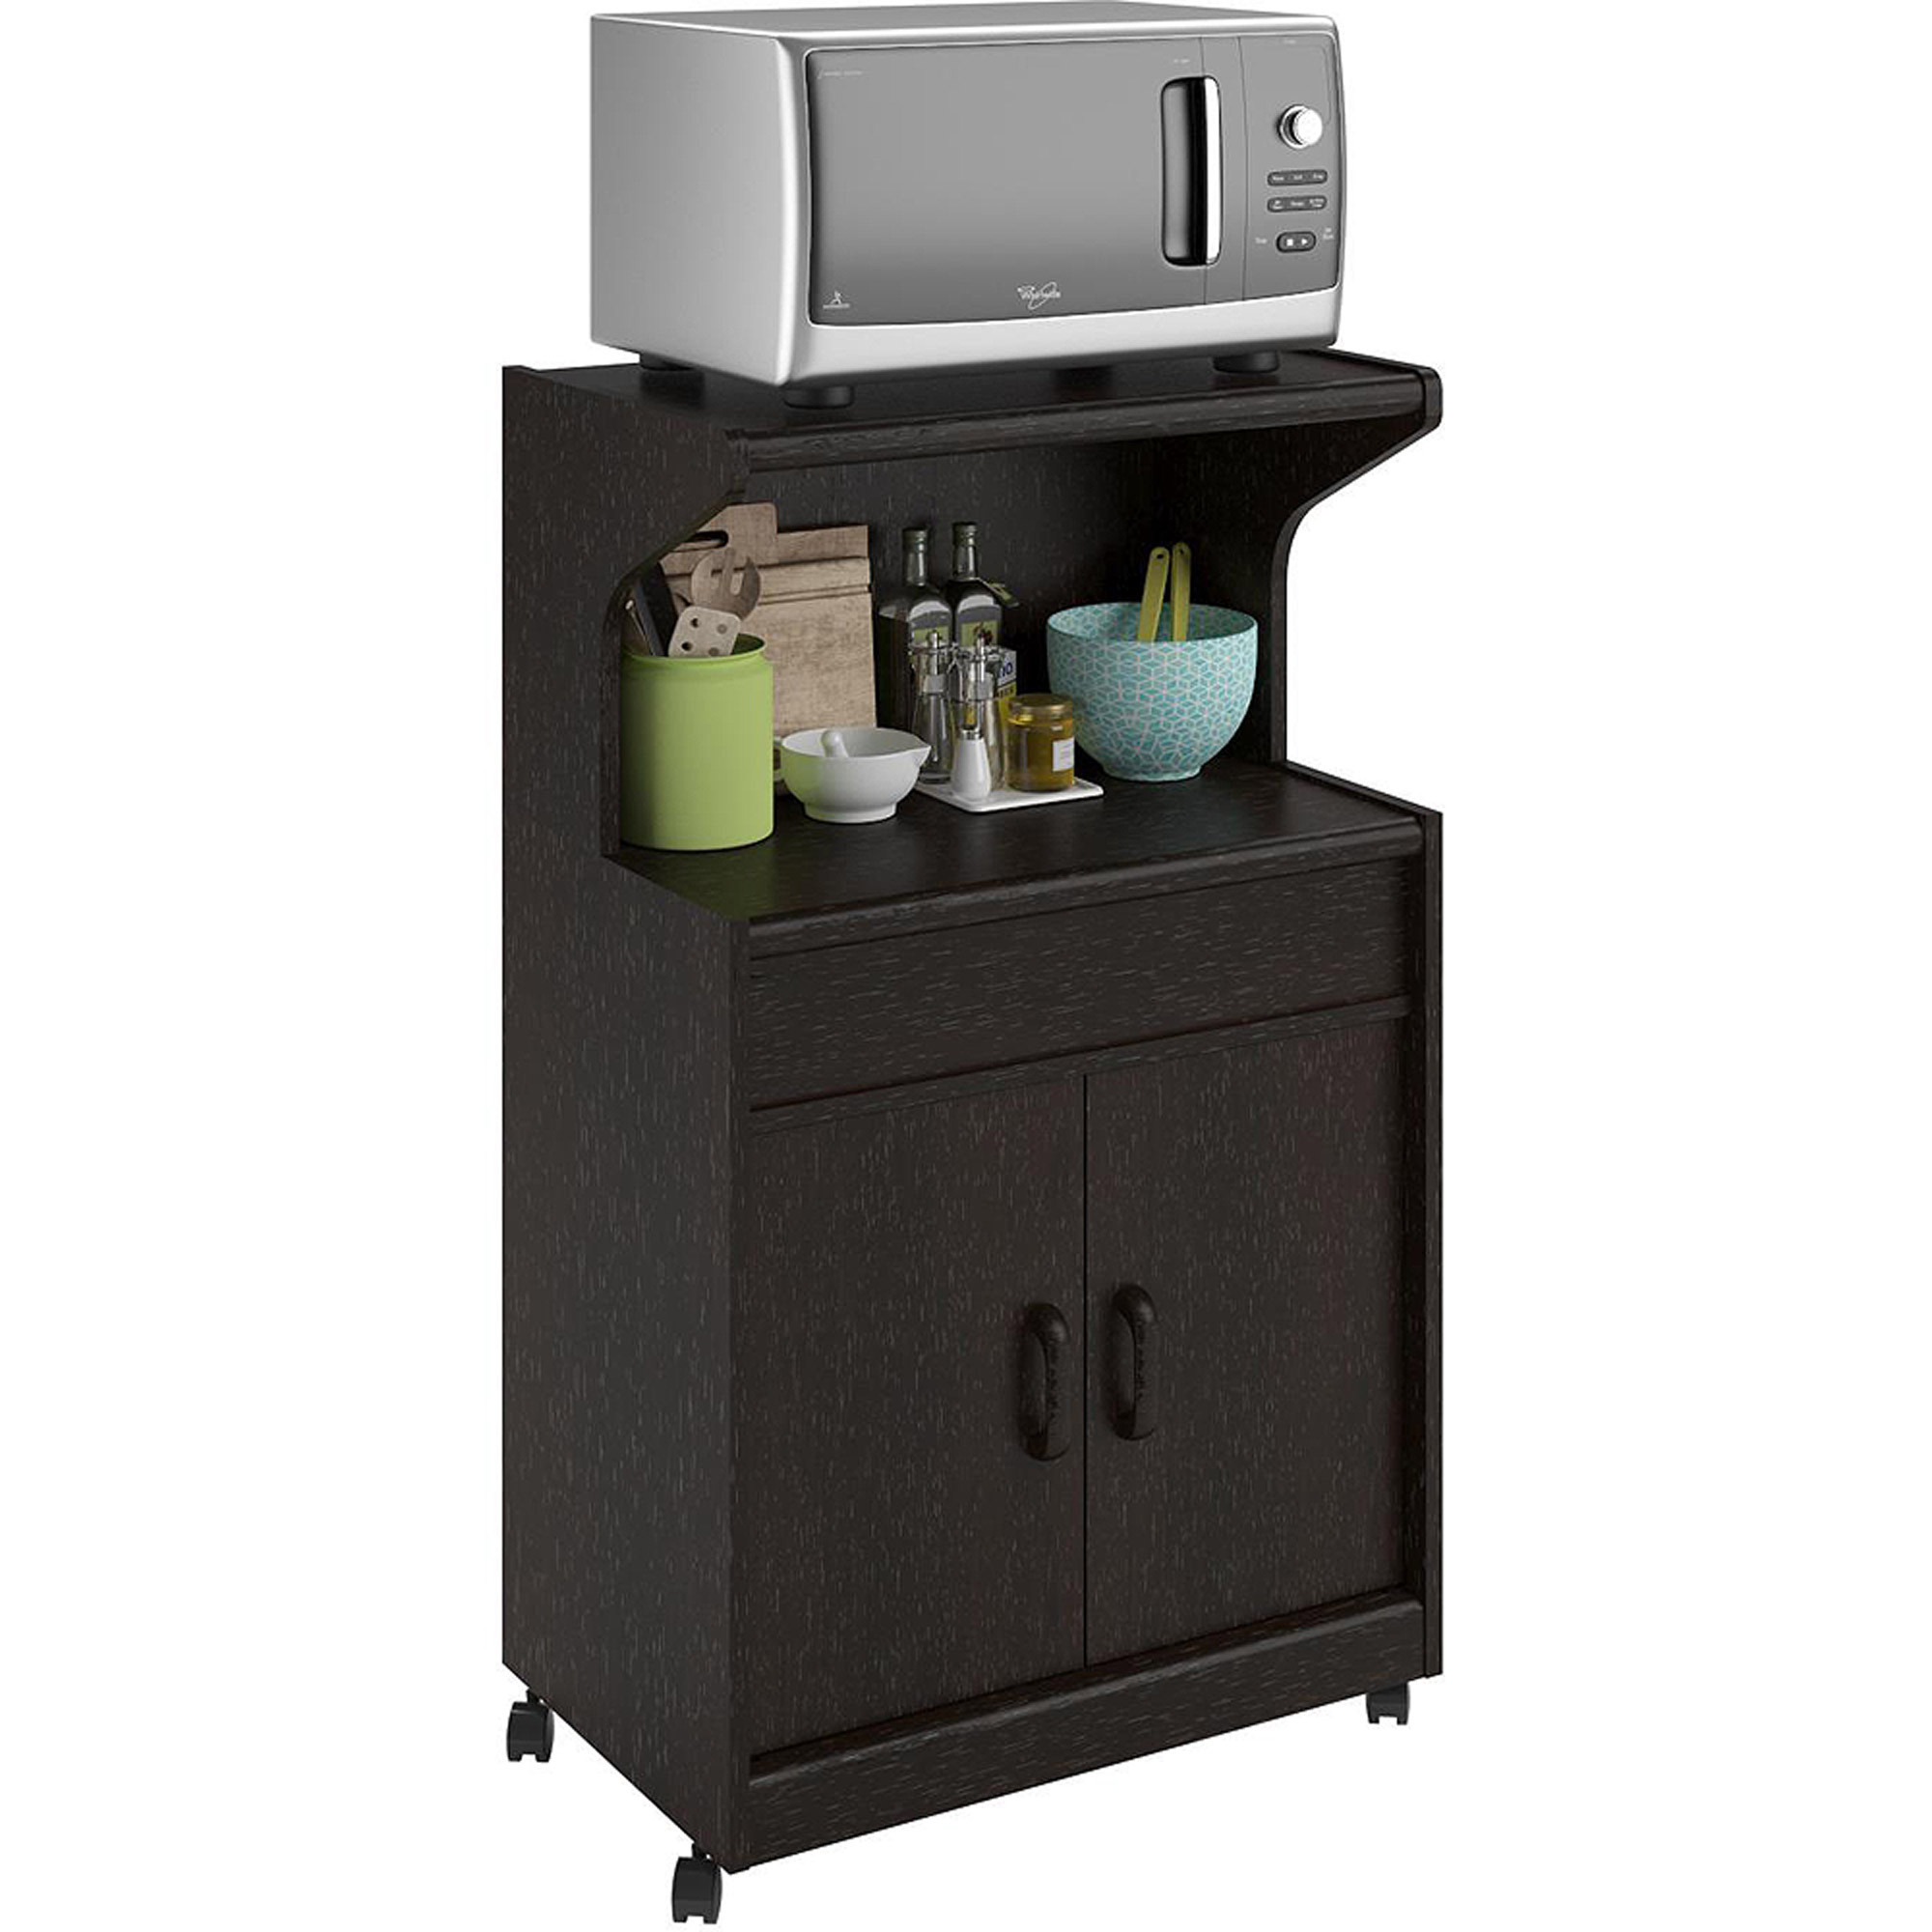 Kitchen Cabinet With Microwave Shelf
 Microwave Cabinet With Shelves Espresso Table Top Storage